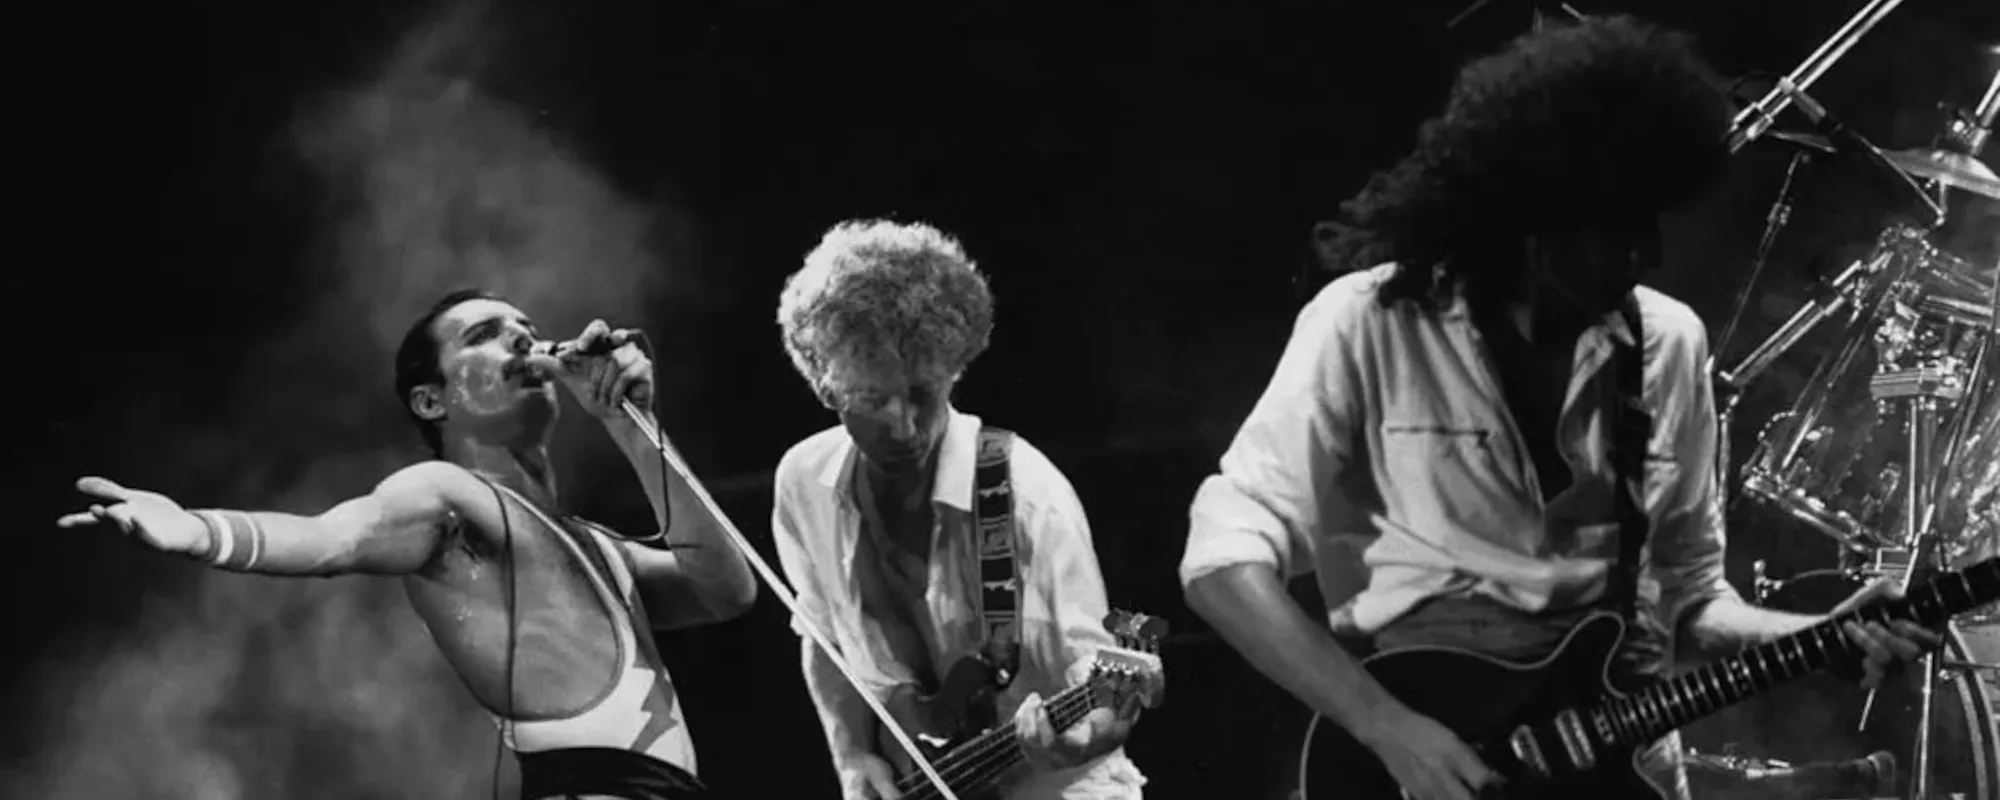 Brian May Says John Deacon Still Involved in Band: “He’s Still Very Much Part of Queen”